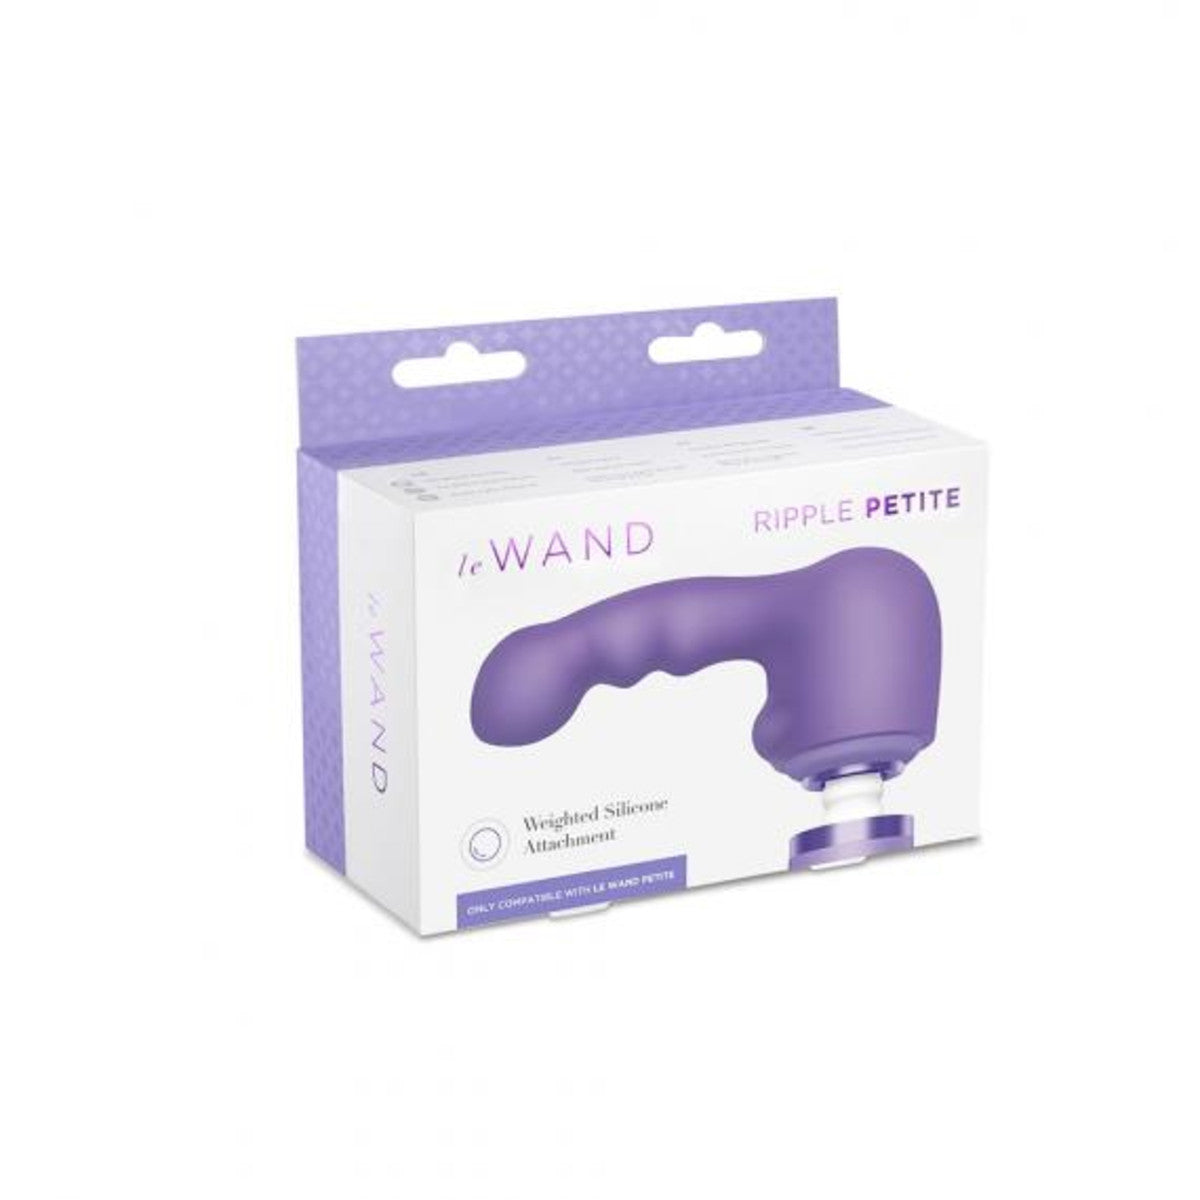 LE WAND PETITE SILICONE WEIGHTED ATTACHMENT